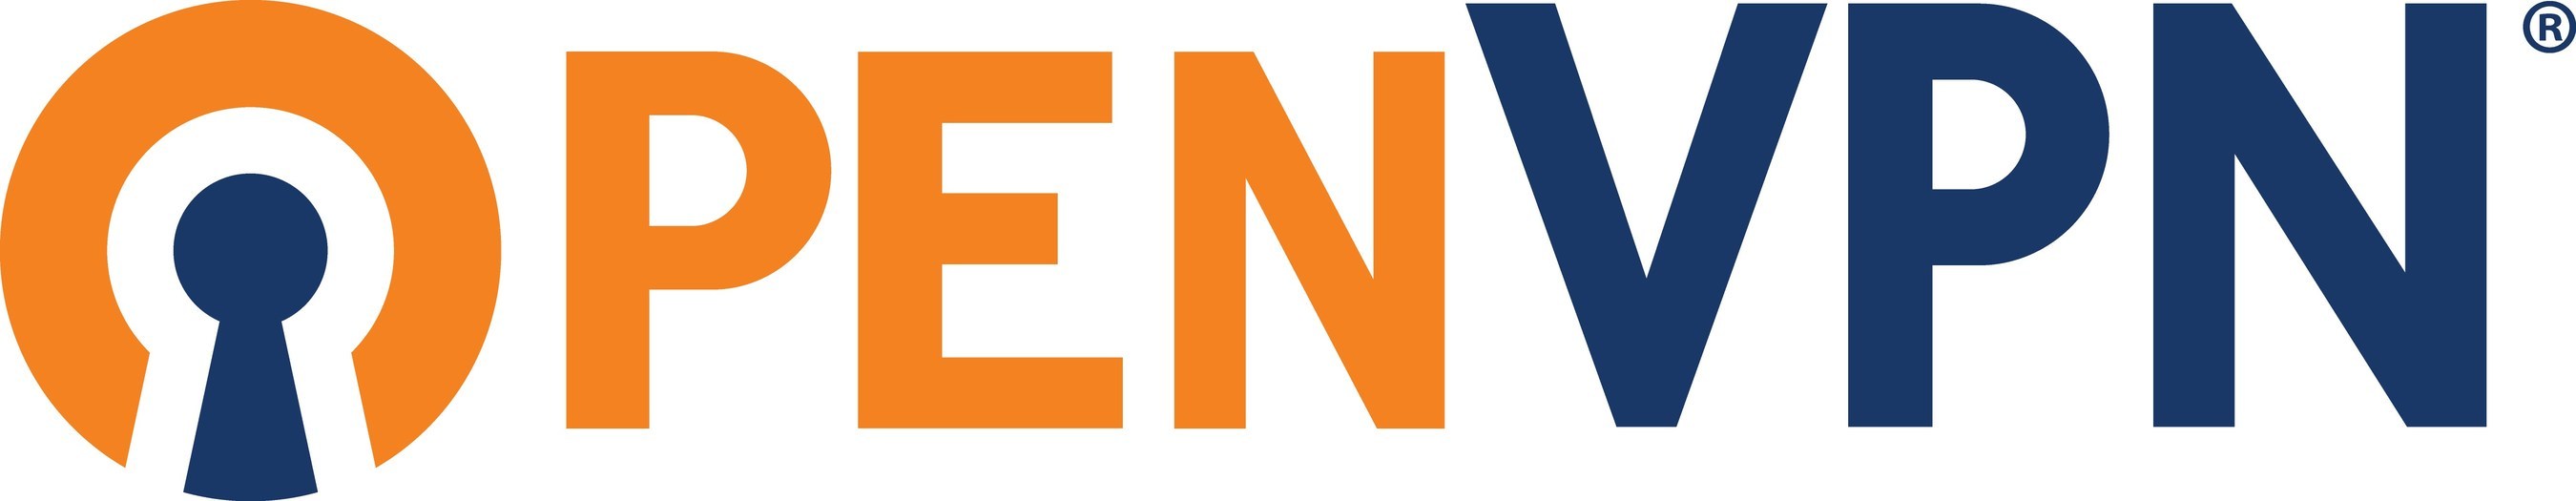 OpenVPN, Inc., Issues Warning As Small Business Saturday Approaches
